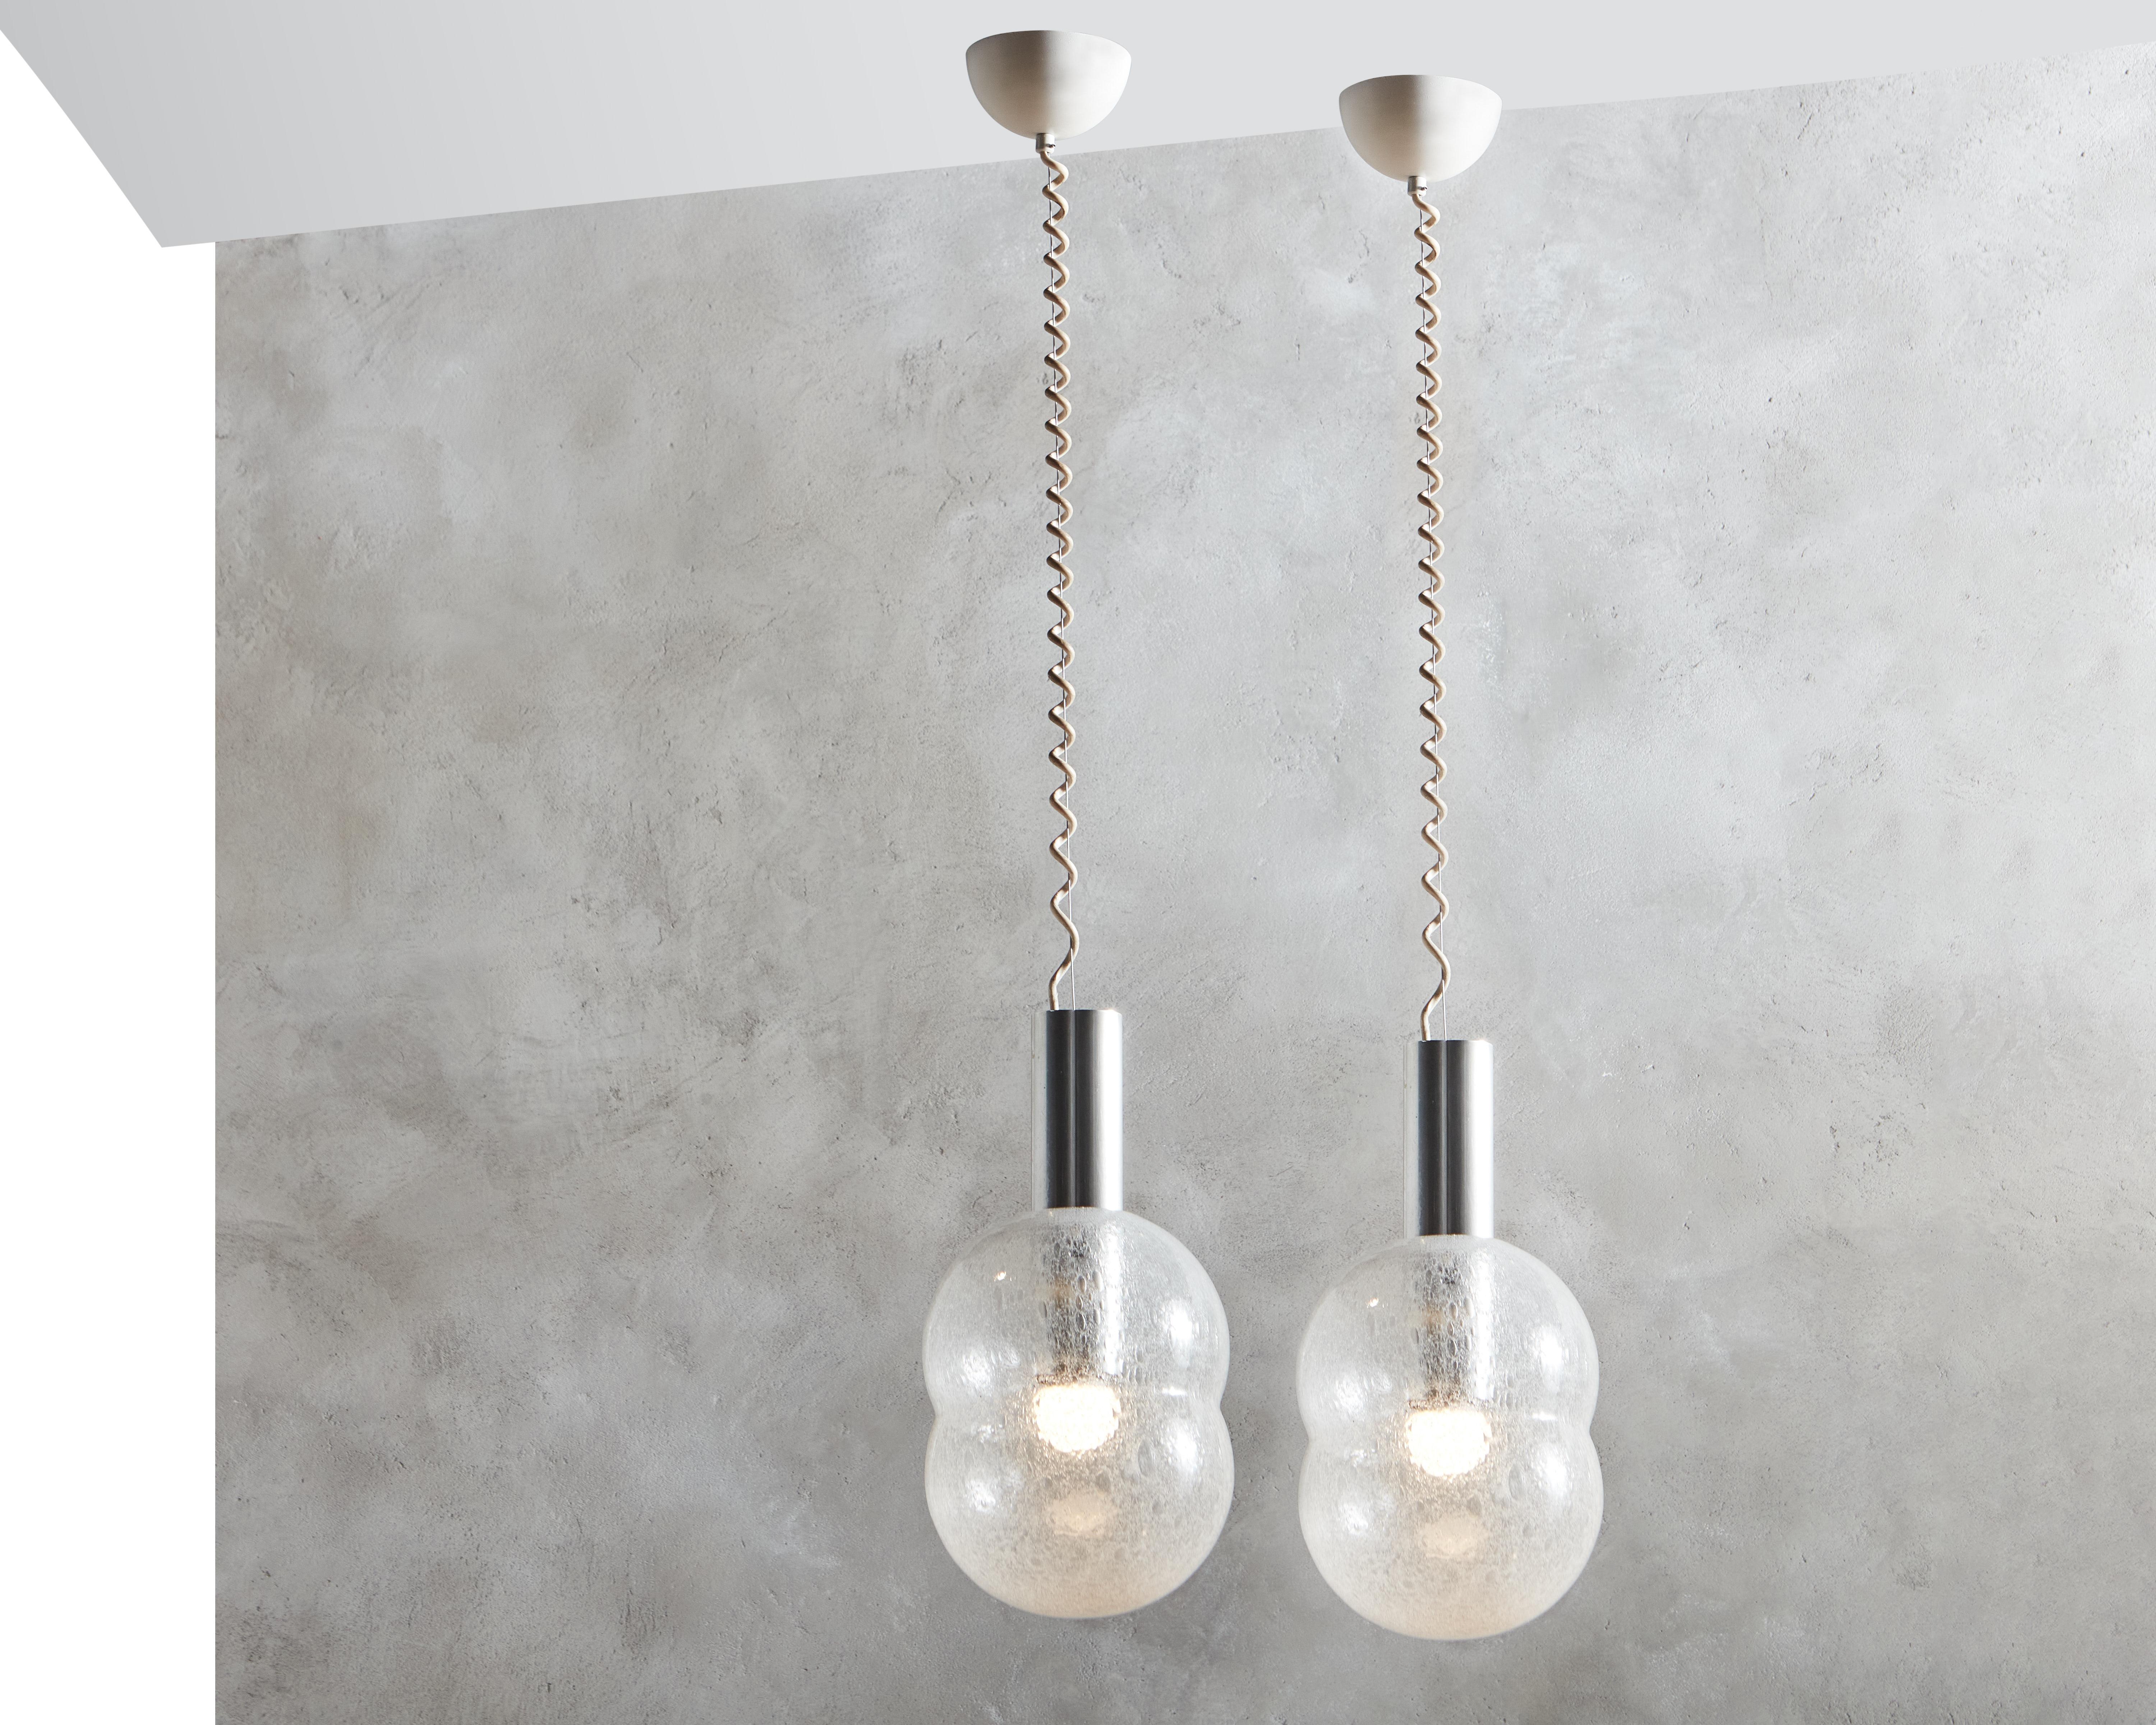 Rare set of two “Bilobo” Pendant lamps by Tobia Scarpa for Flos. Pendant lamps, giving diffused light, fitted with metalized glass diffuser. Anodized aluminium support with a spring loaded device for removal of the glass diffuser. “The model come